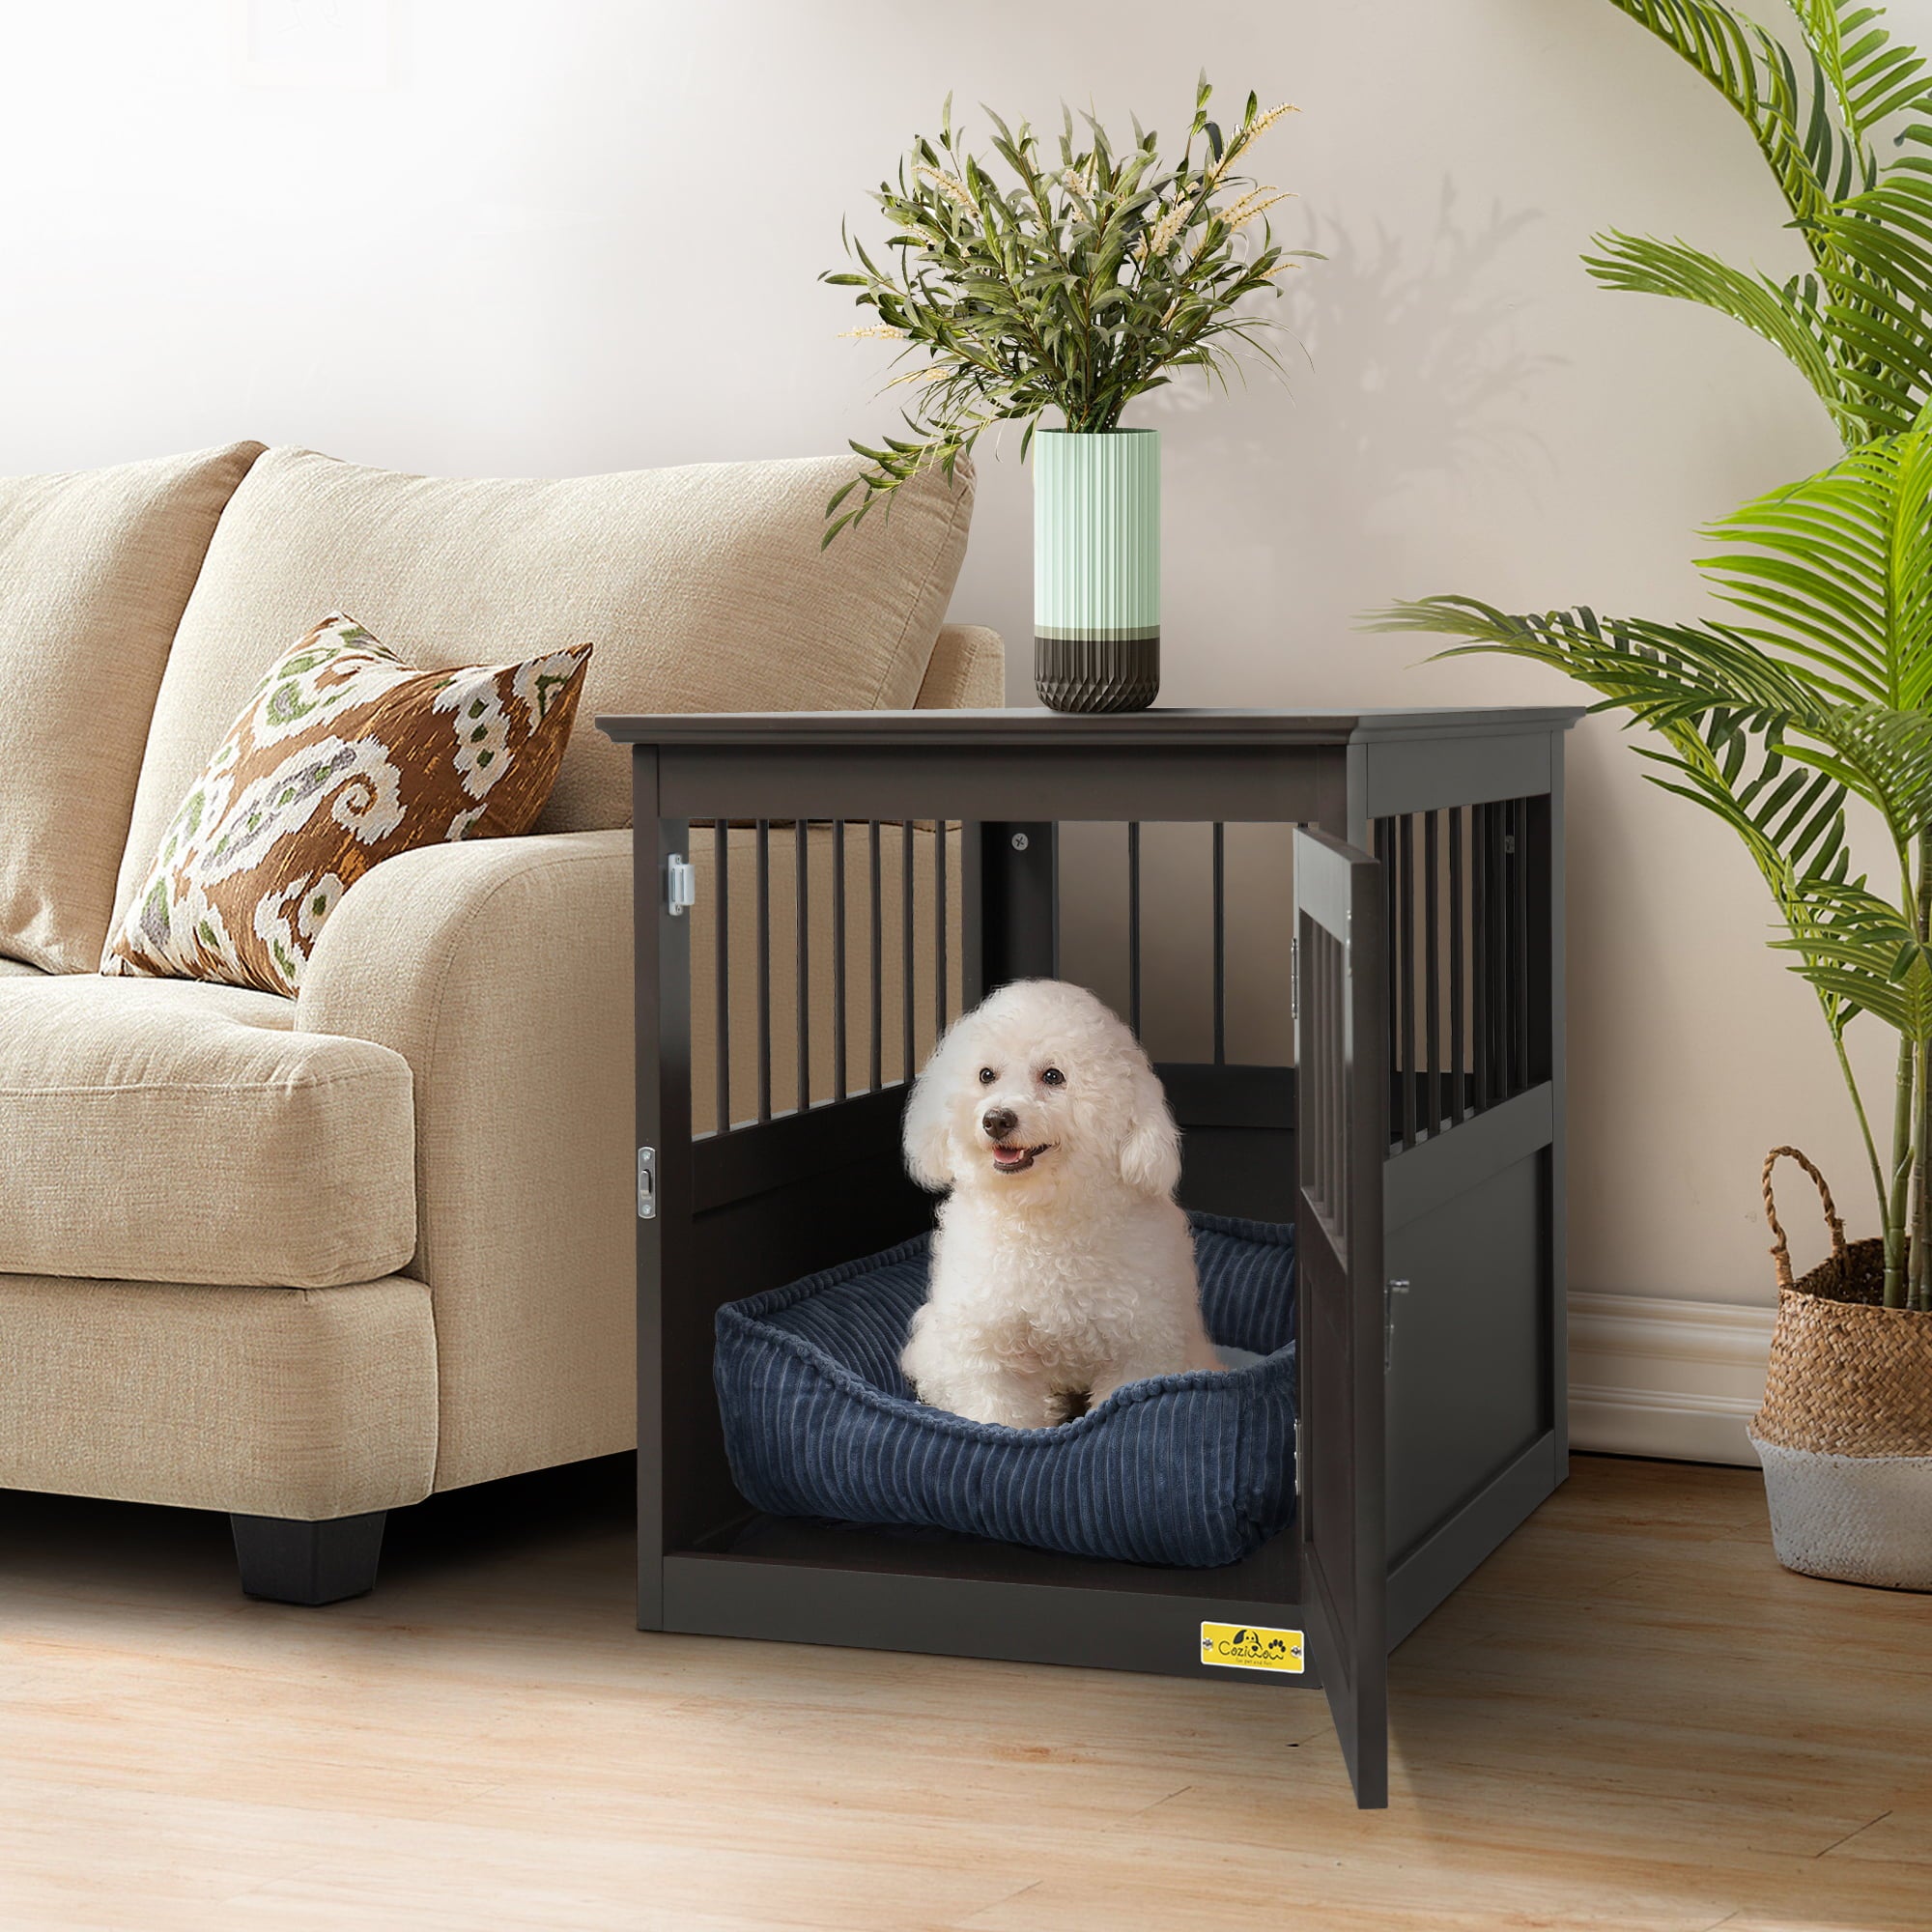 Coziwow Pet Crate End Table Wooden Dog Furniture Kennel Indoor Cage Brown